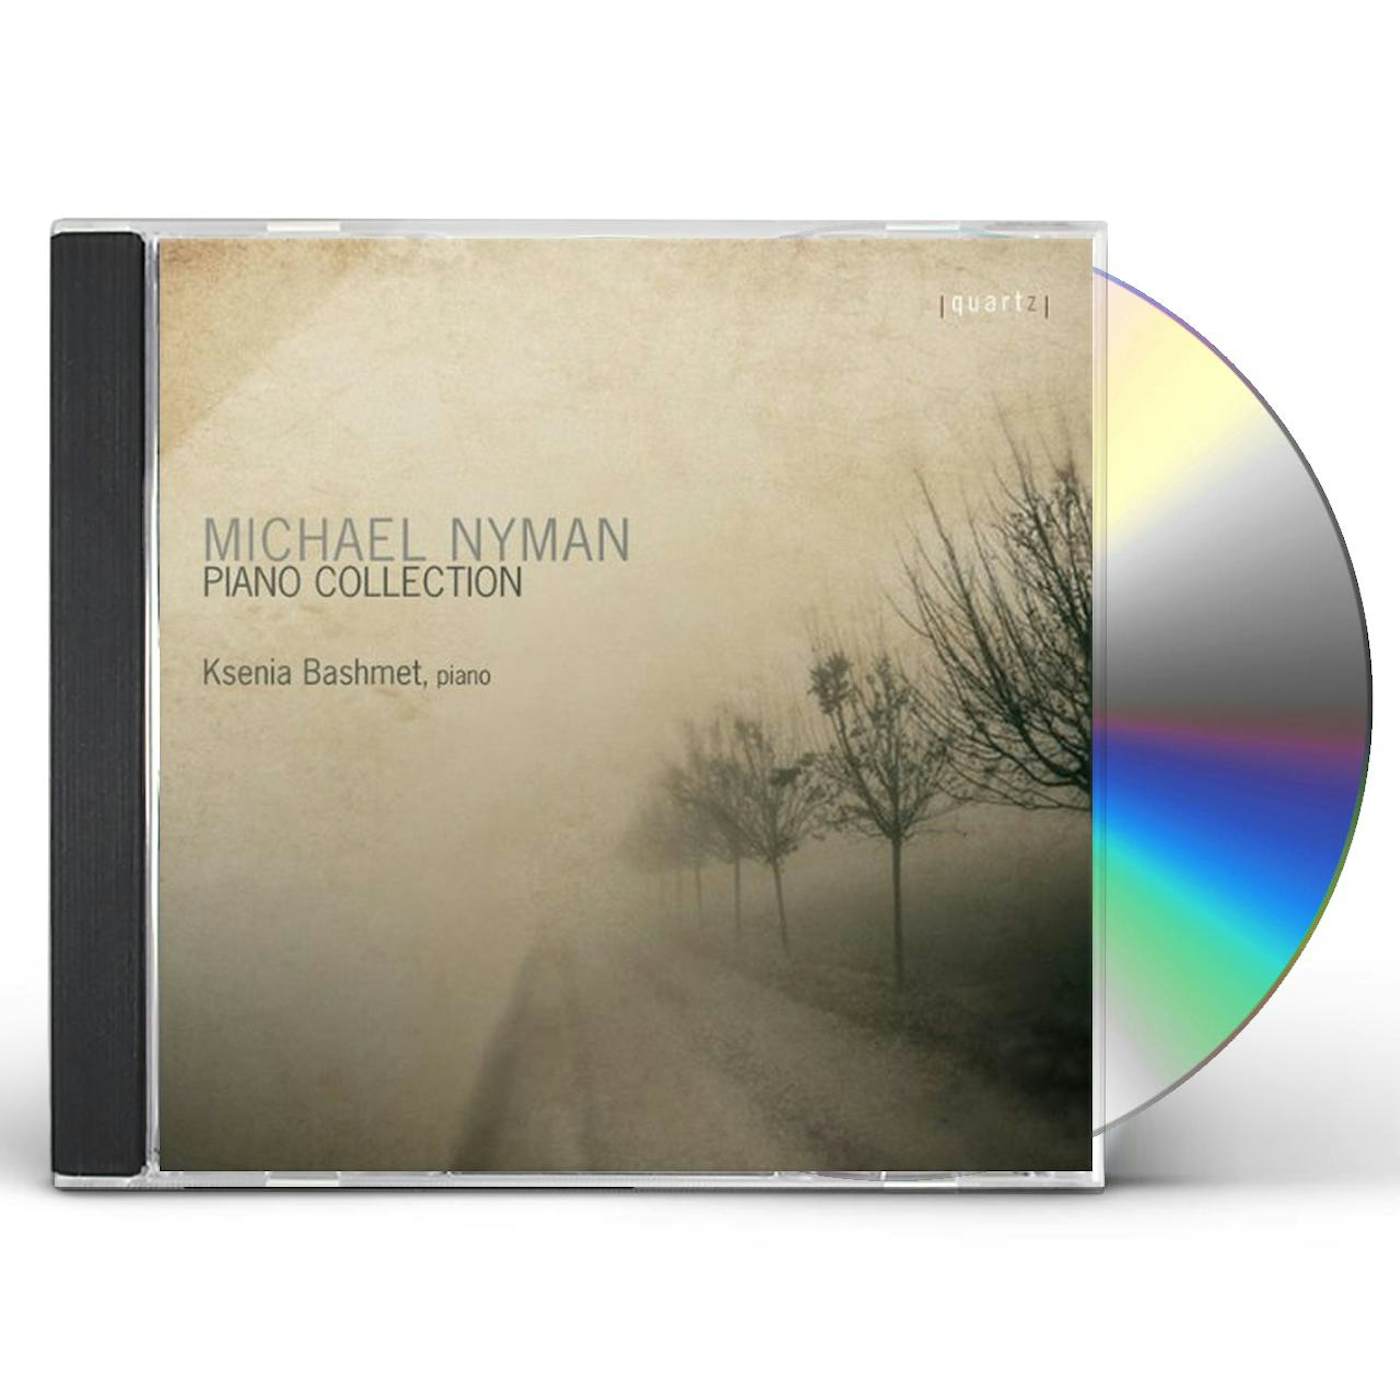 Michael Nyman PIANO COLLECTION CD